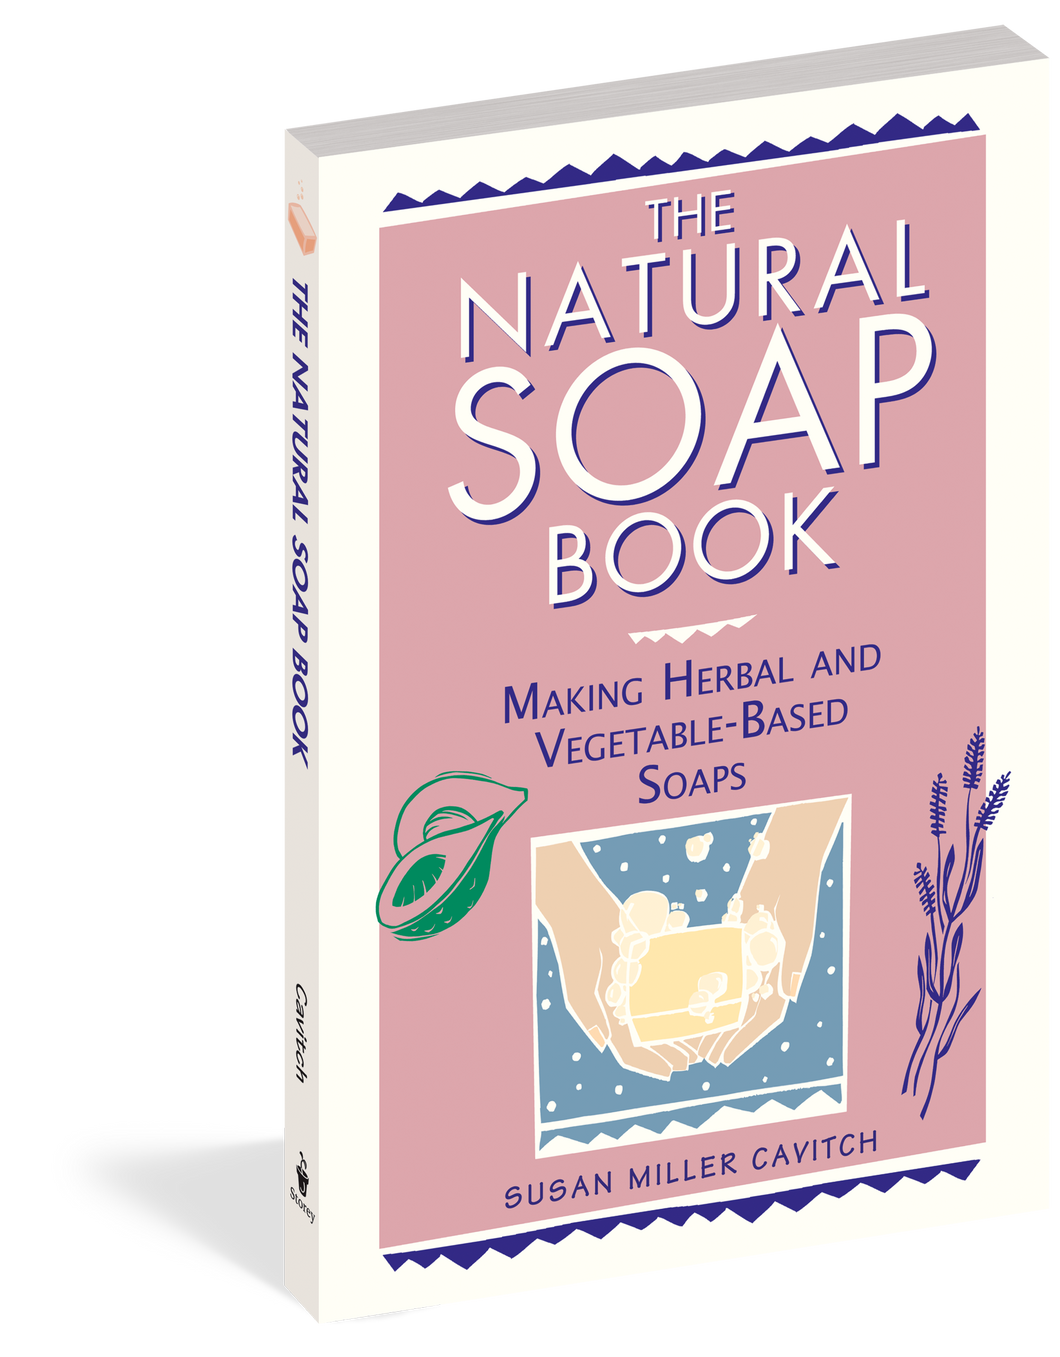 The Natural Soap Book Making Herbal and Vegetable-Based Soaps